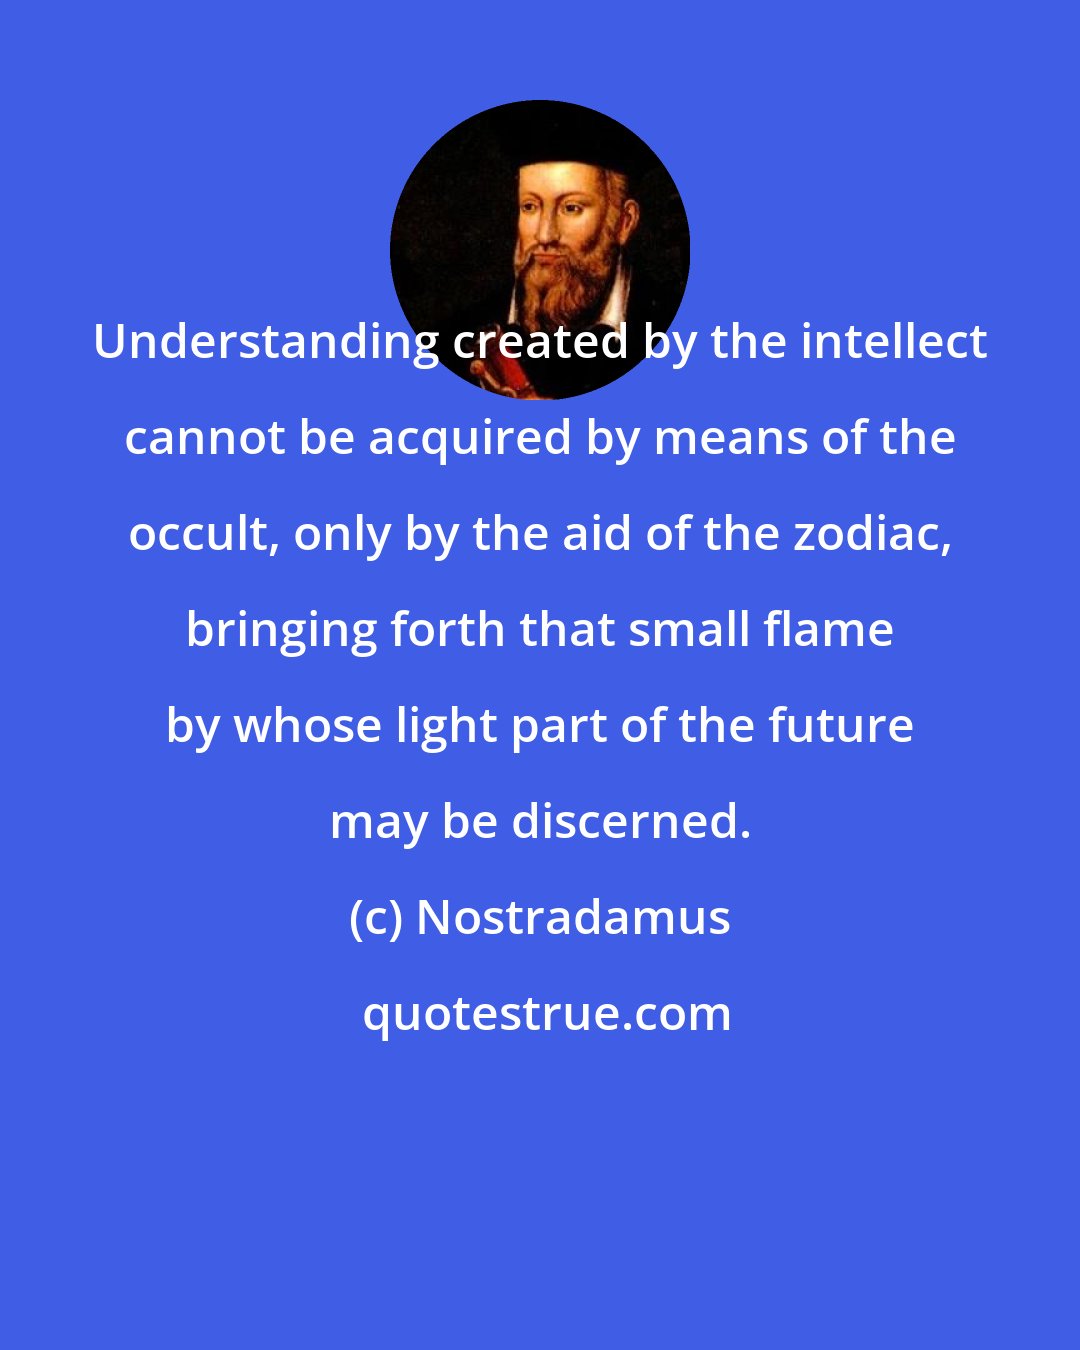 Nostradamus: Understanding created by the intellect cannot be acquired by means of the occult, only by the aid of the zodiac, bringing forth that small flame by whose light part of the future may be discerned.